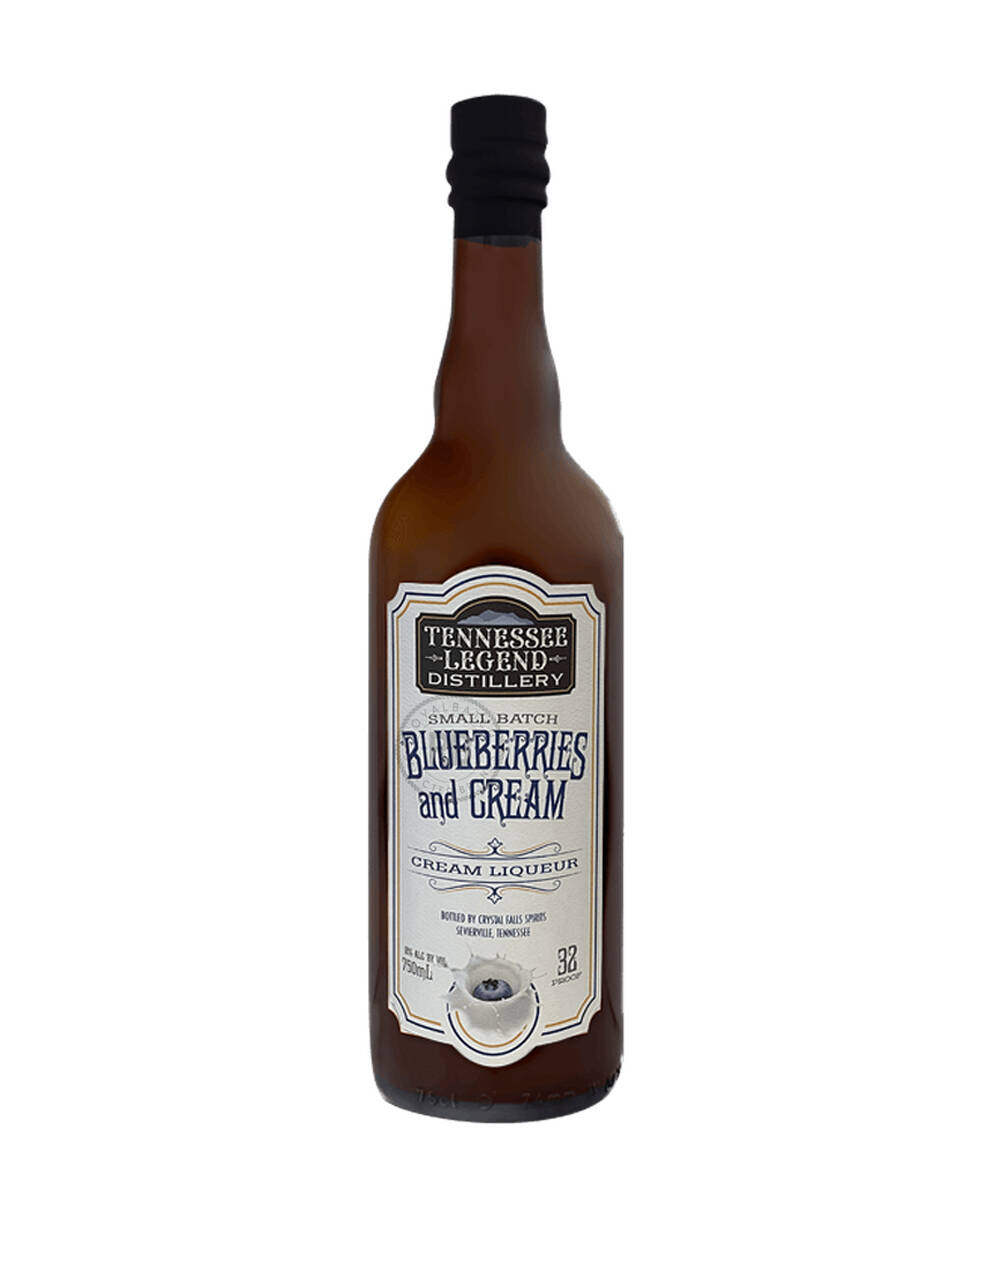 Tennessee Legend Small Batch Blueberries and Cream Liqueur